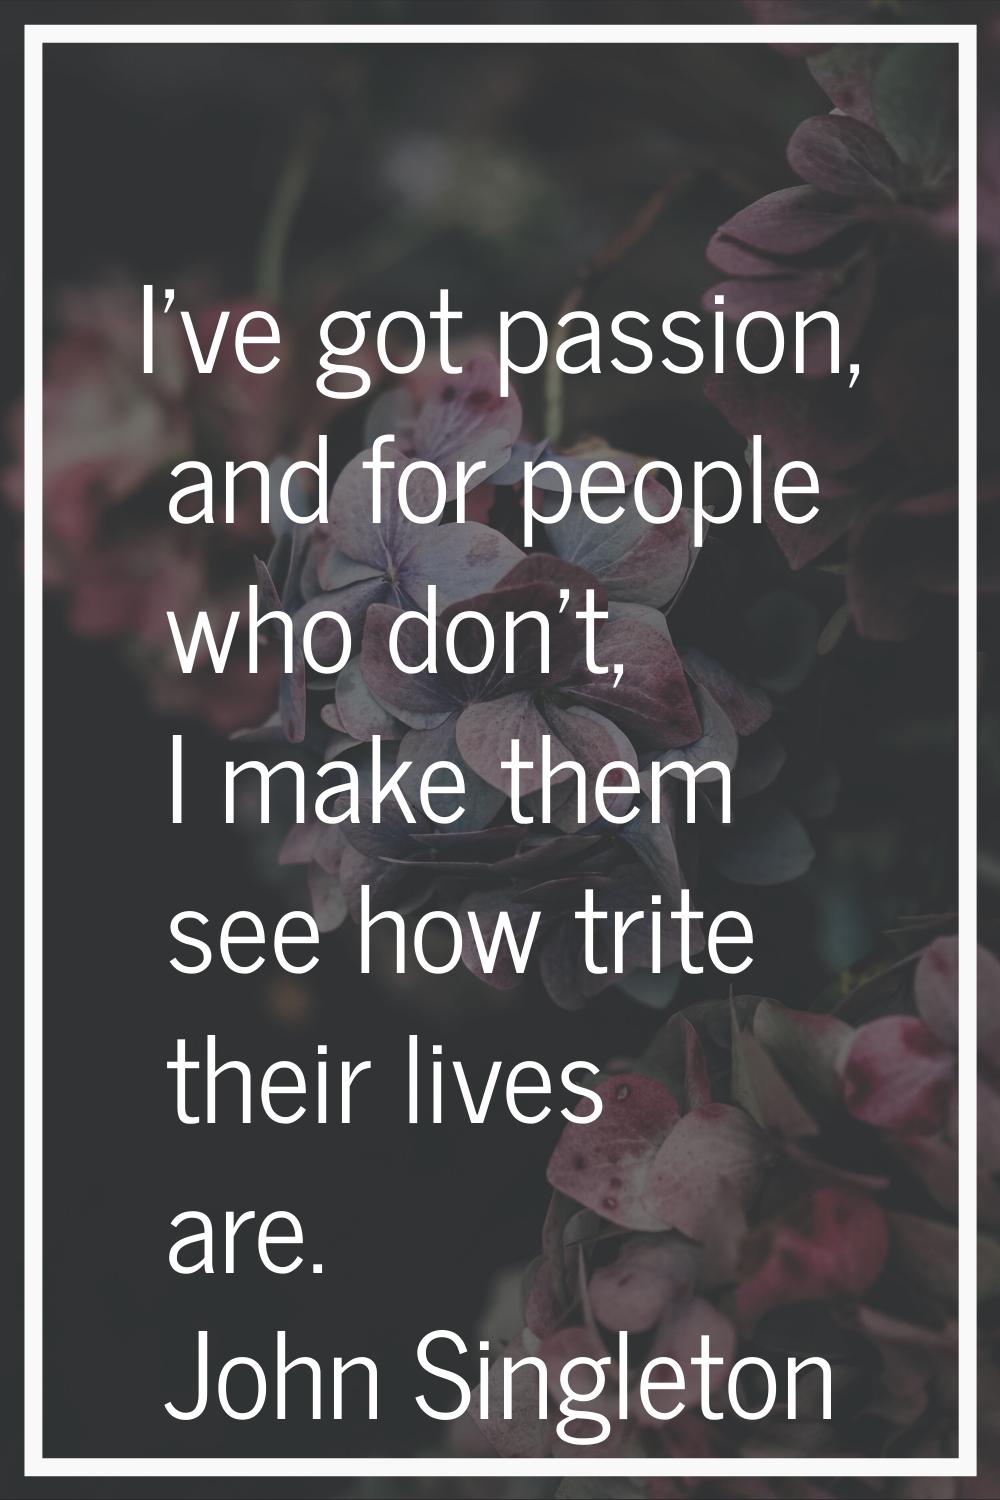 I've got passion, and for people who don't, I make them see how trite their lives are.